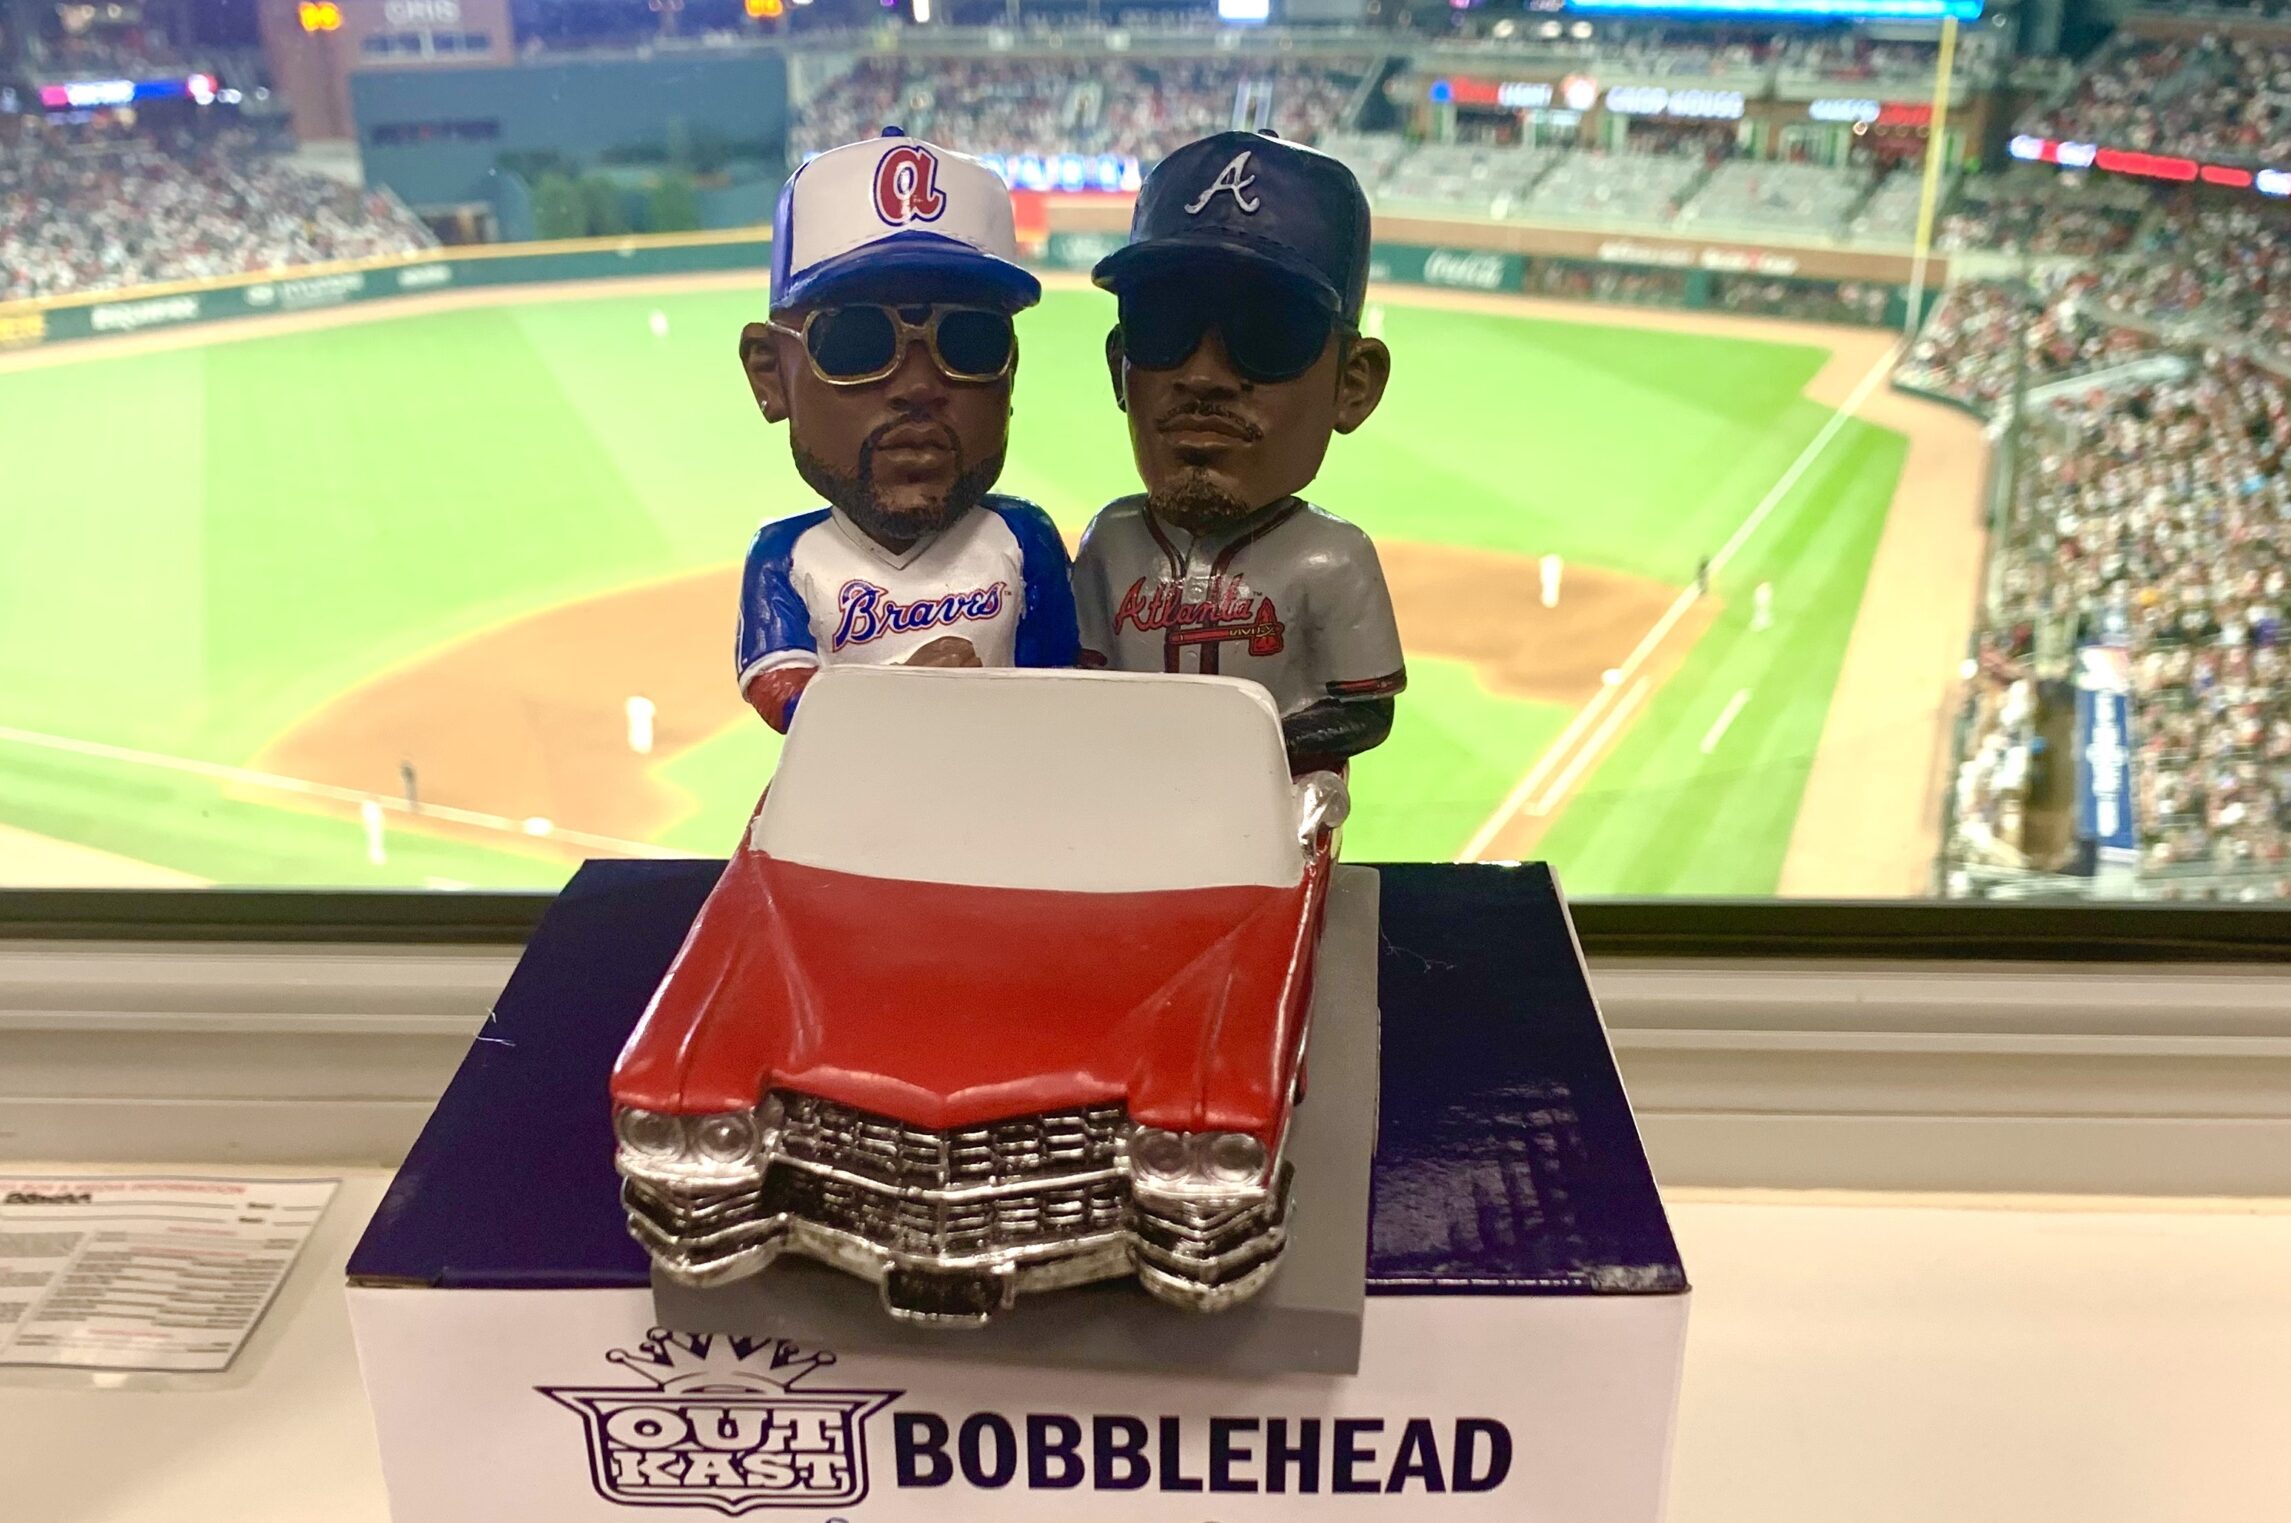 OutKast Bobblehead Night Proves To Be A Hit, Breaks Attendance